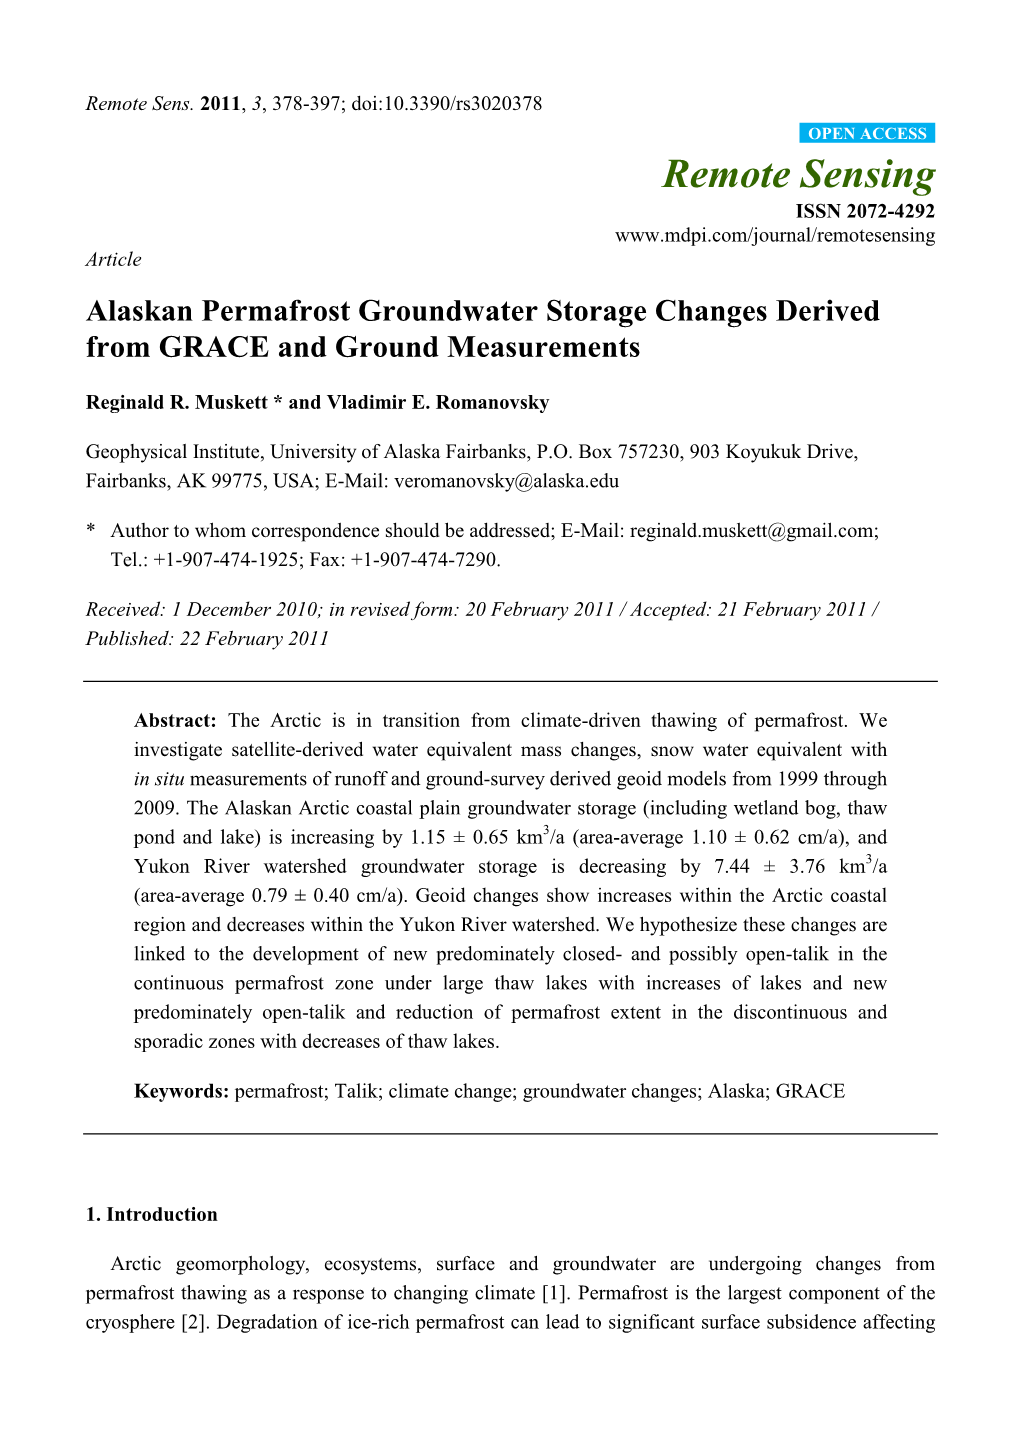 Alaskan Permafrost Groundwater Storage Changes Derived from GRACE and Ground Measurements